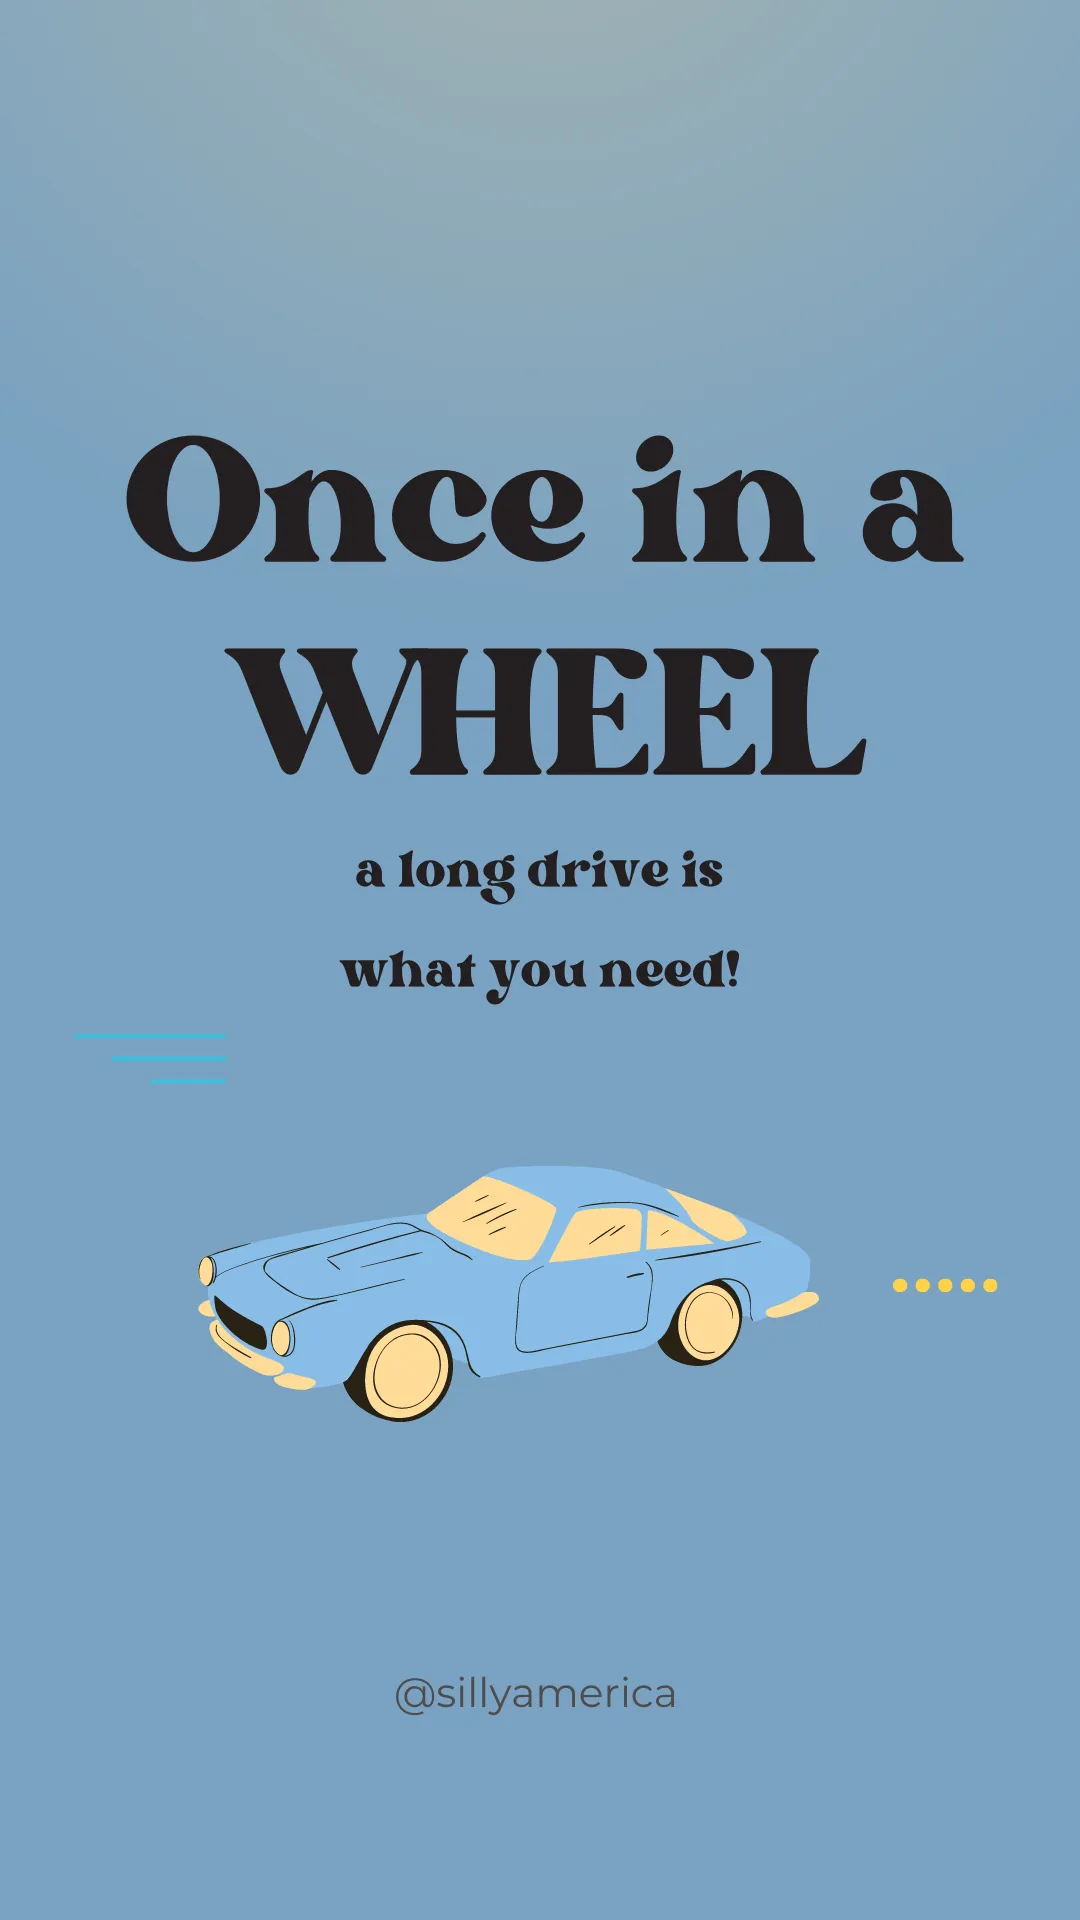 Once in a WHEEL, a long drive is what you need!